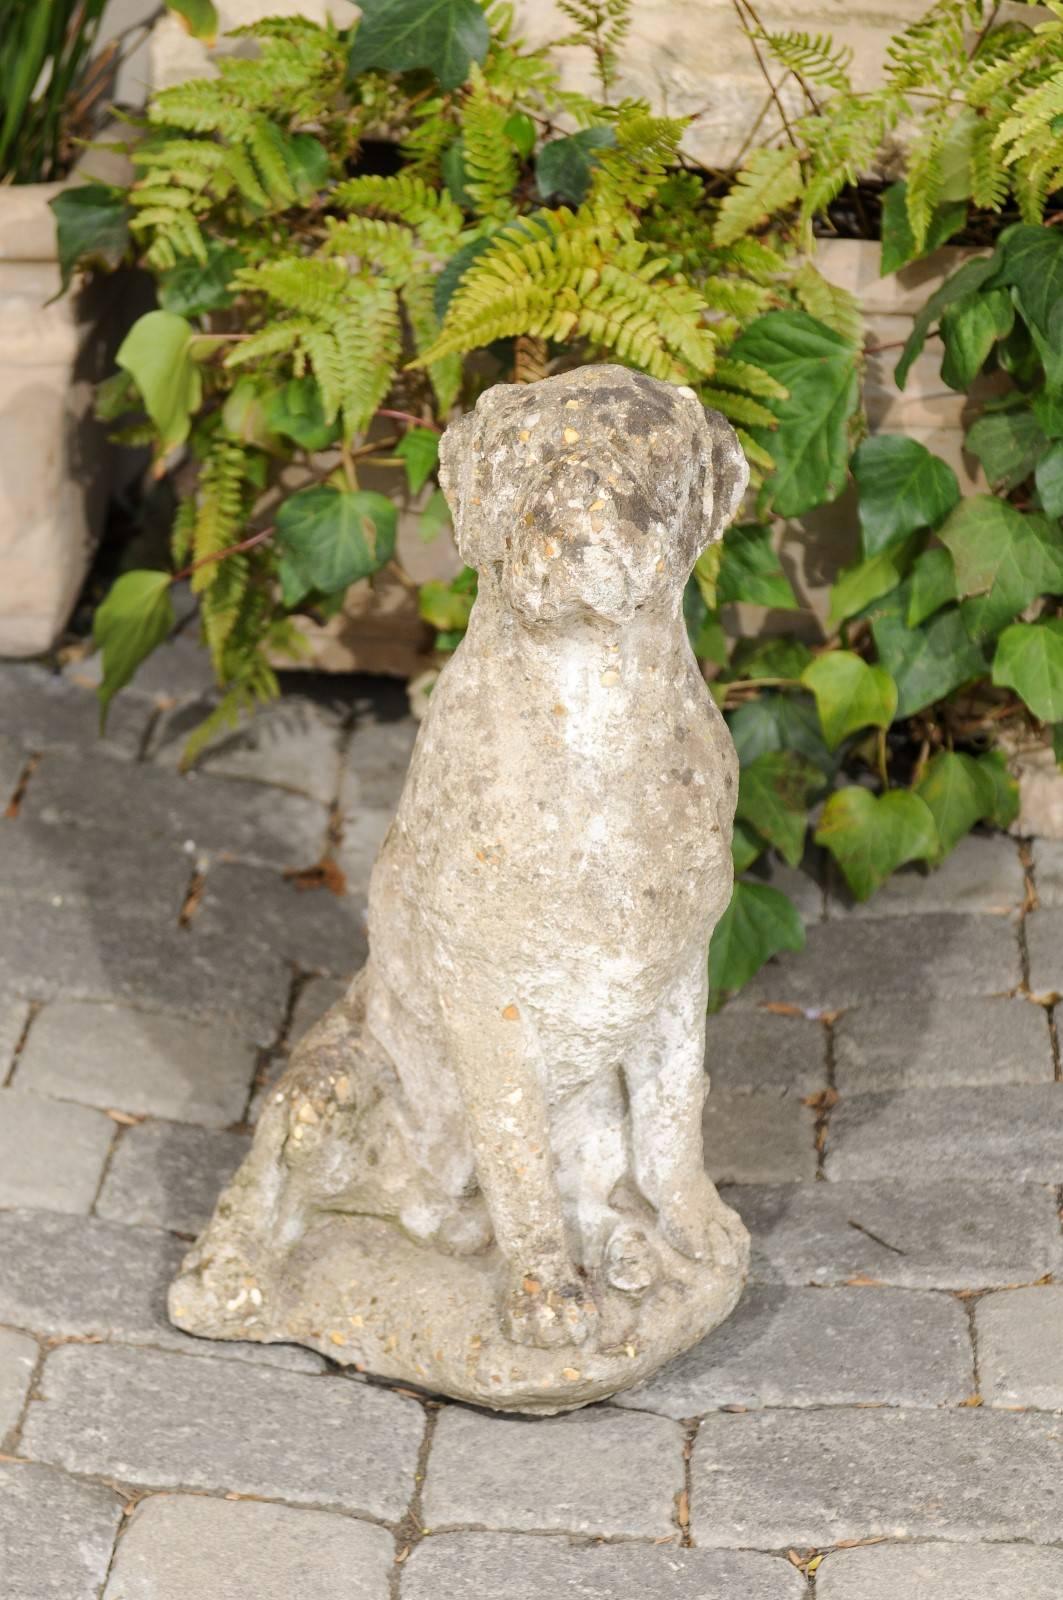 A French vintage stone dog sculpture with weathered appearance from the first half of the 20th century. This French statue depicts a dog, obediently sitting in a pose that will be not be unfamiliar to dog owners. With its weight shifted to the left,